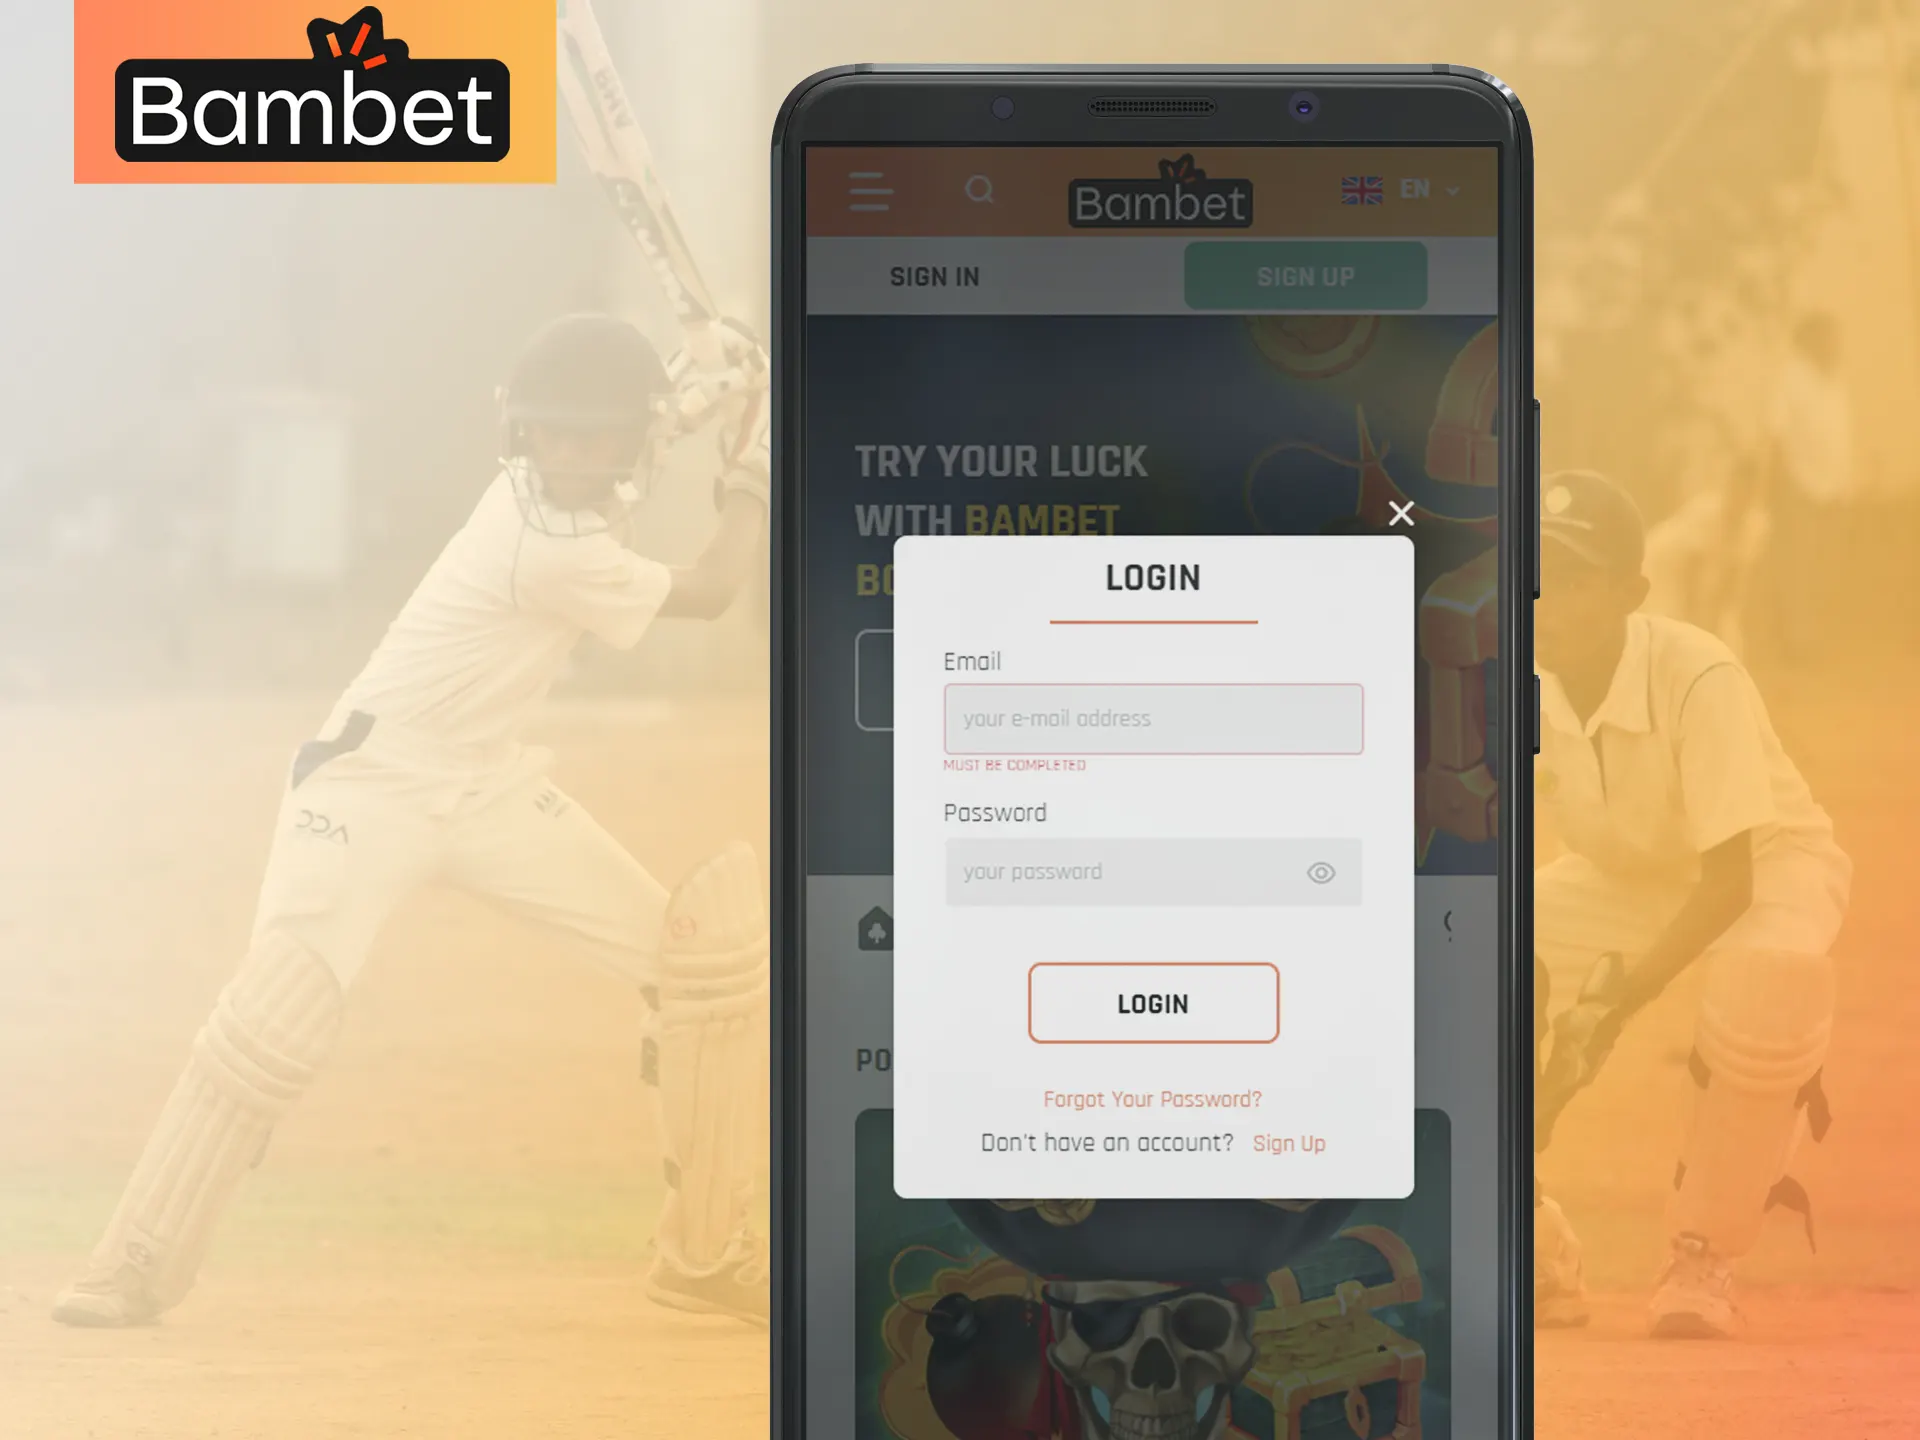 Log in to your account on the Bambet app.